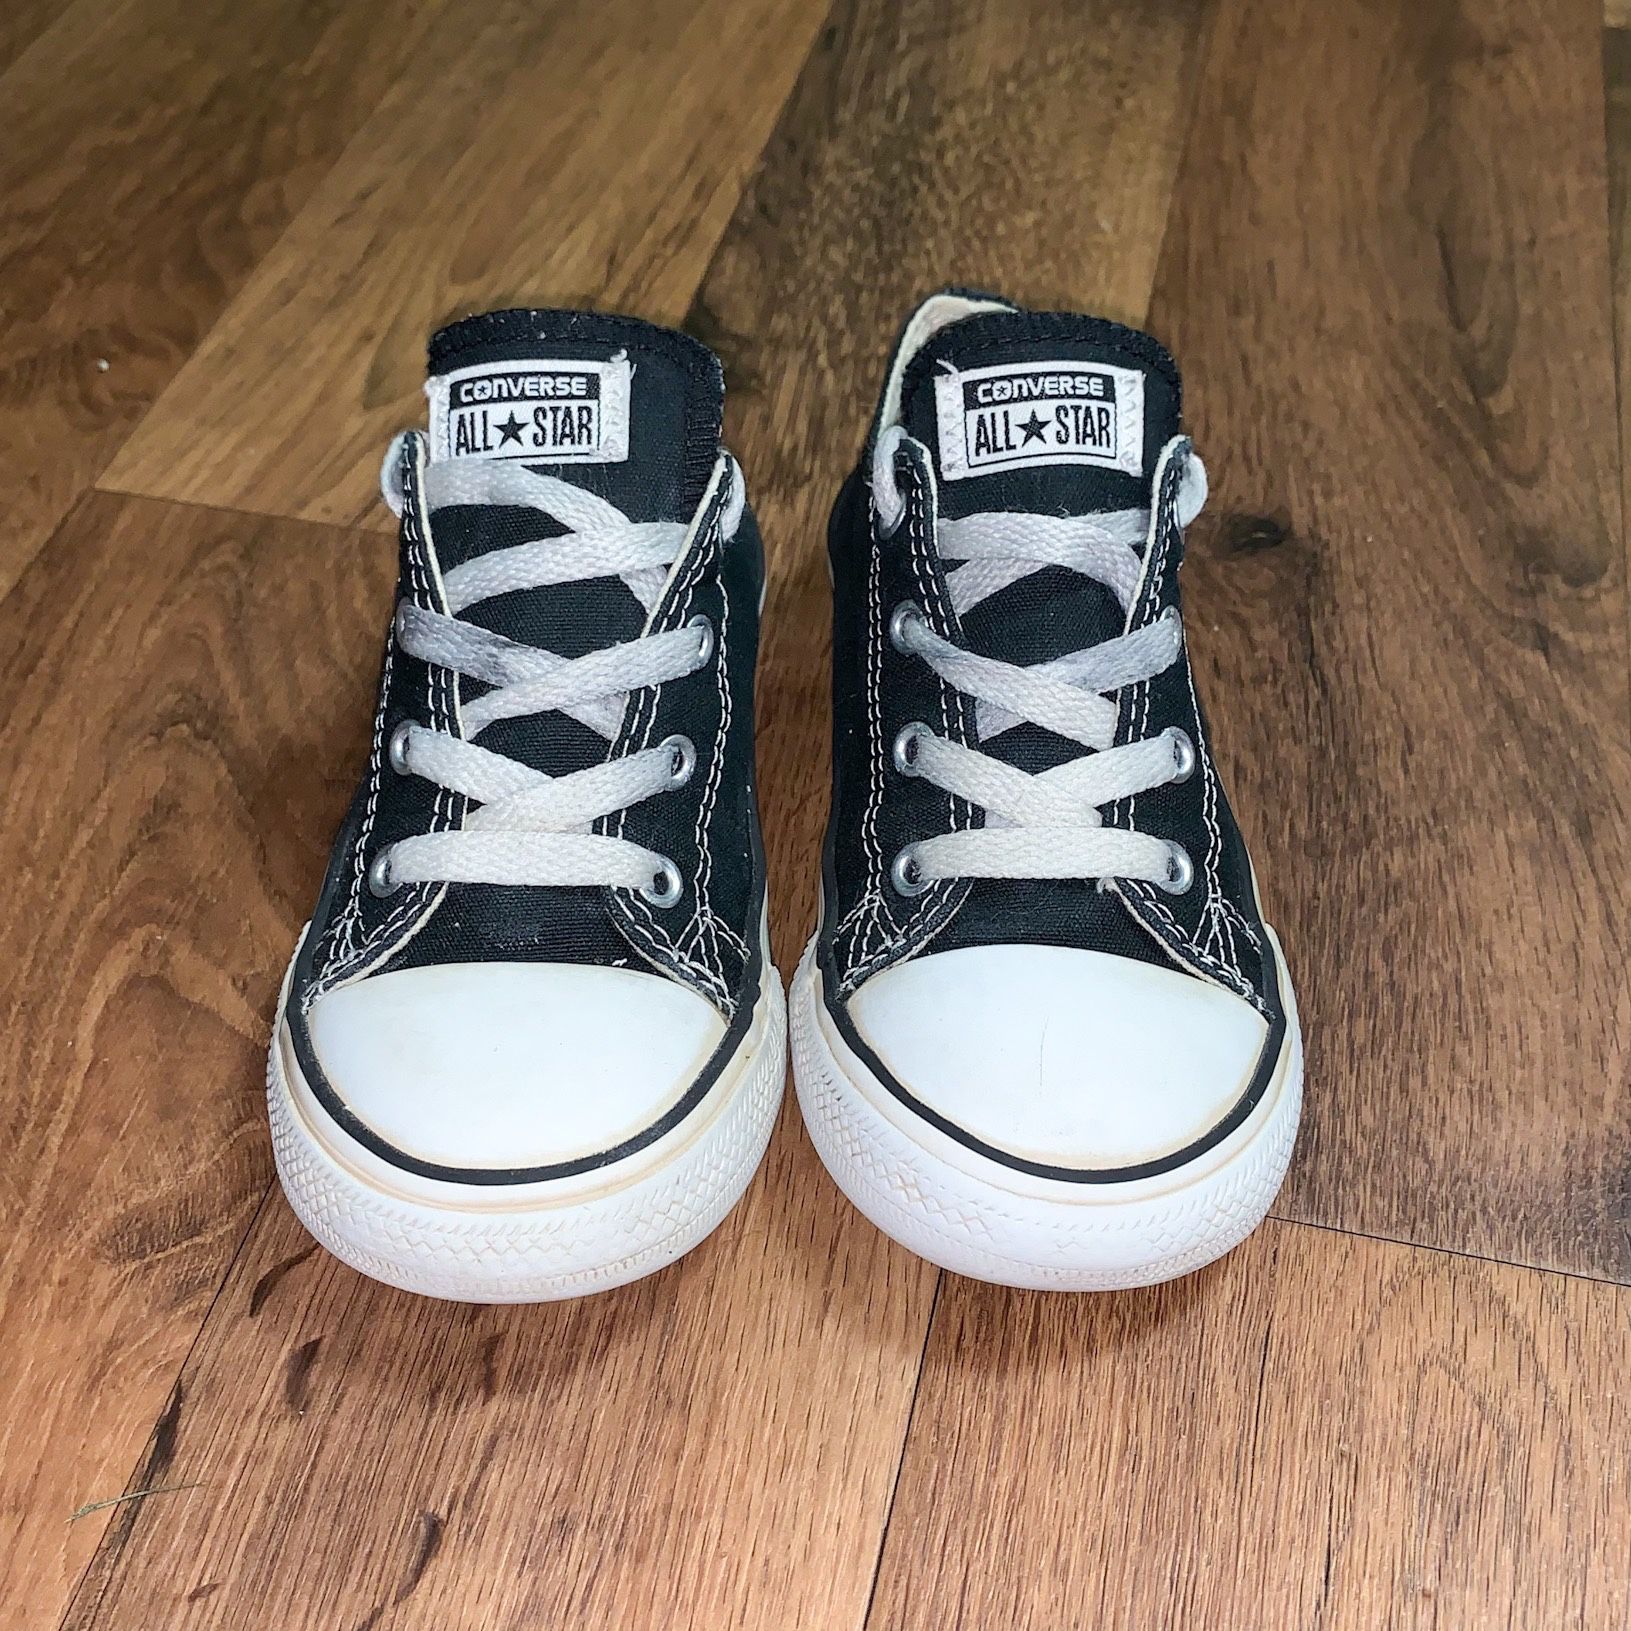 Converse All Star Chuck Taylor Toddler Shoes Size 10